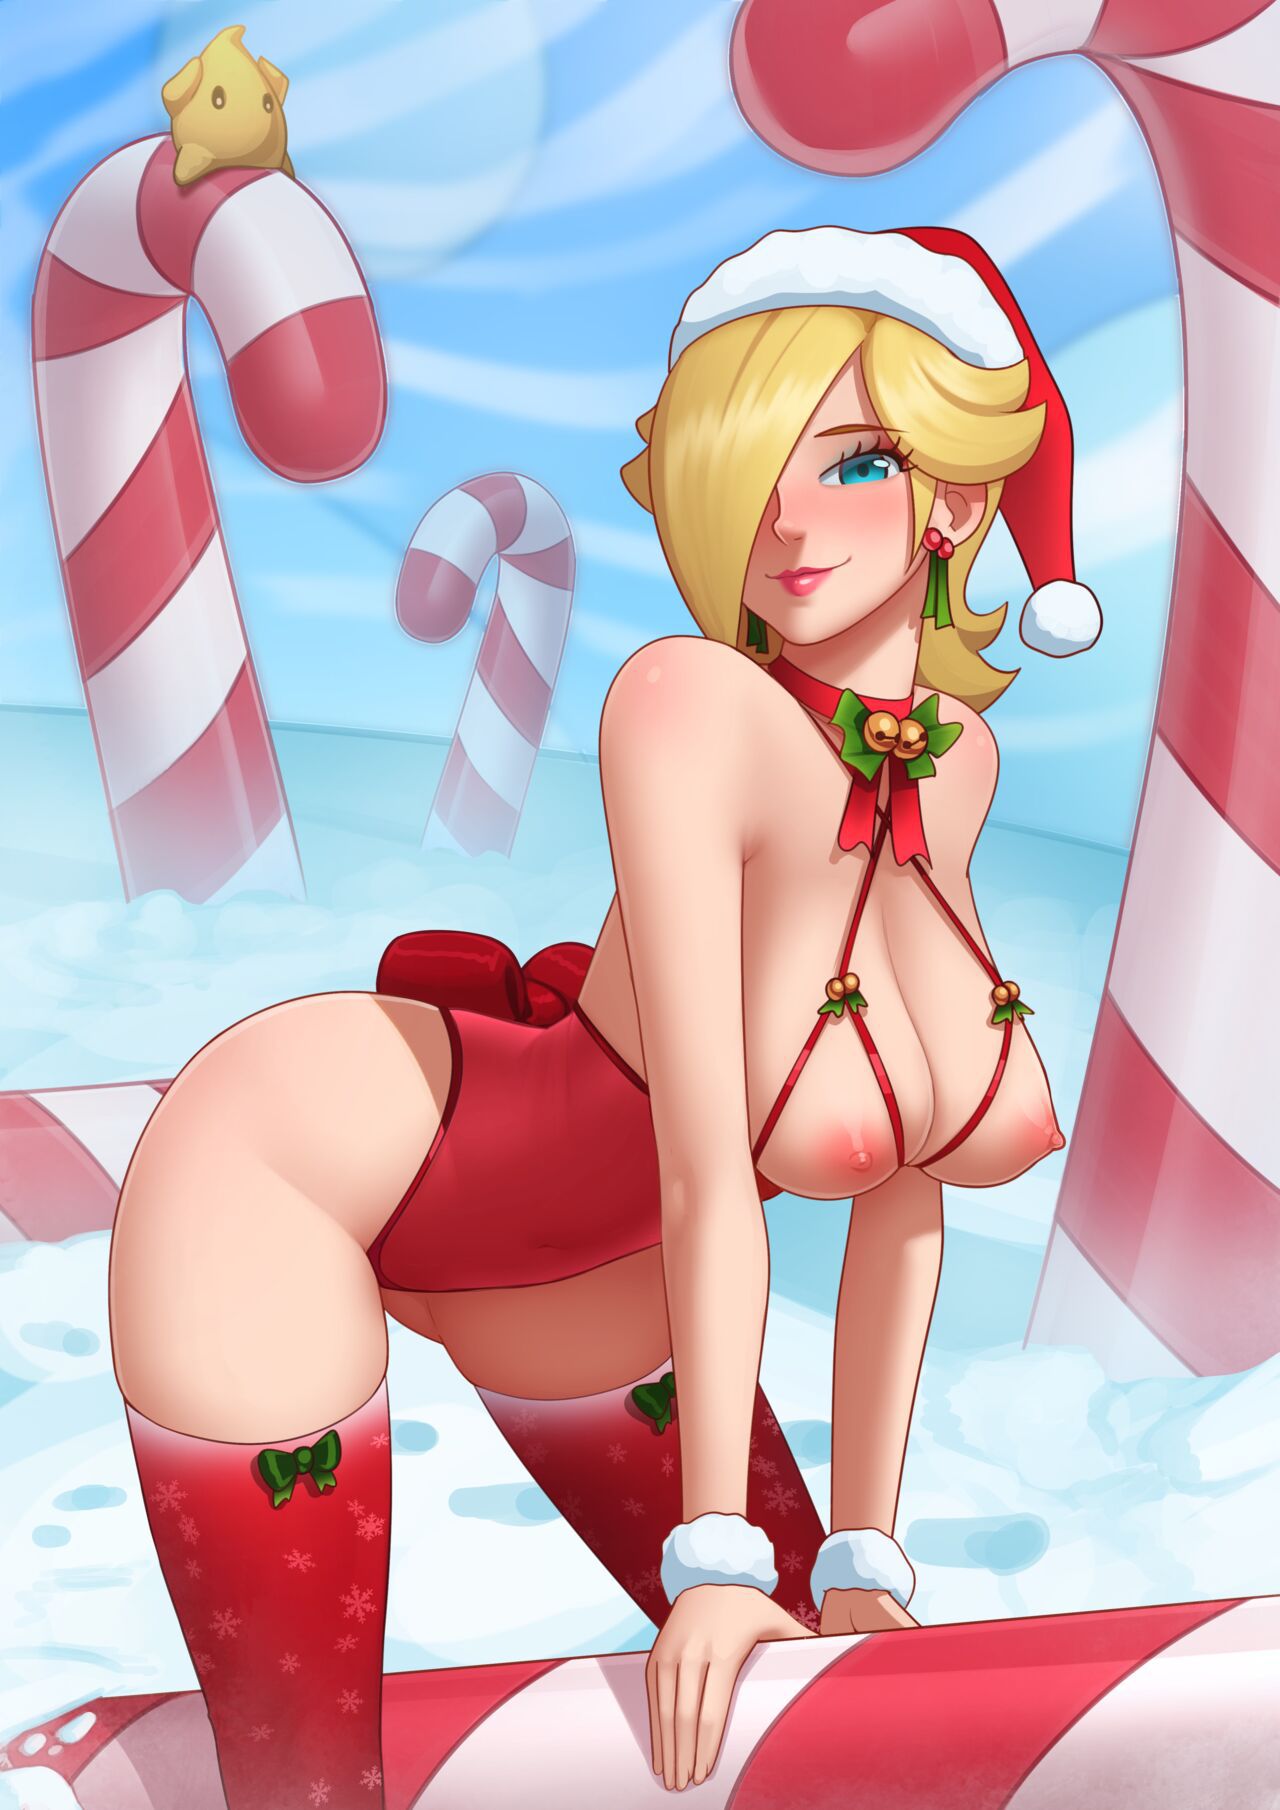 [Deilan12] Candy Canes Appeared 14